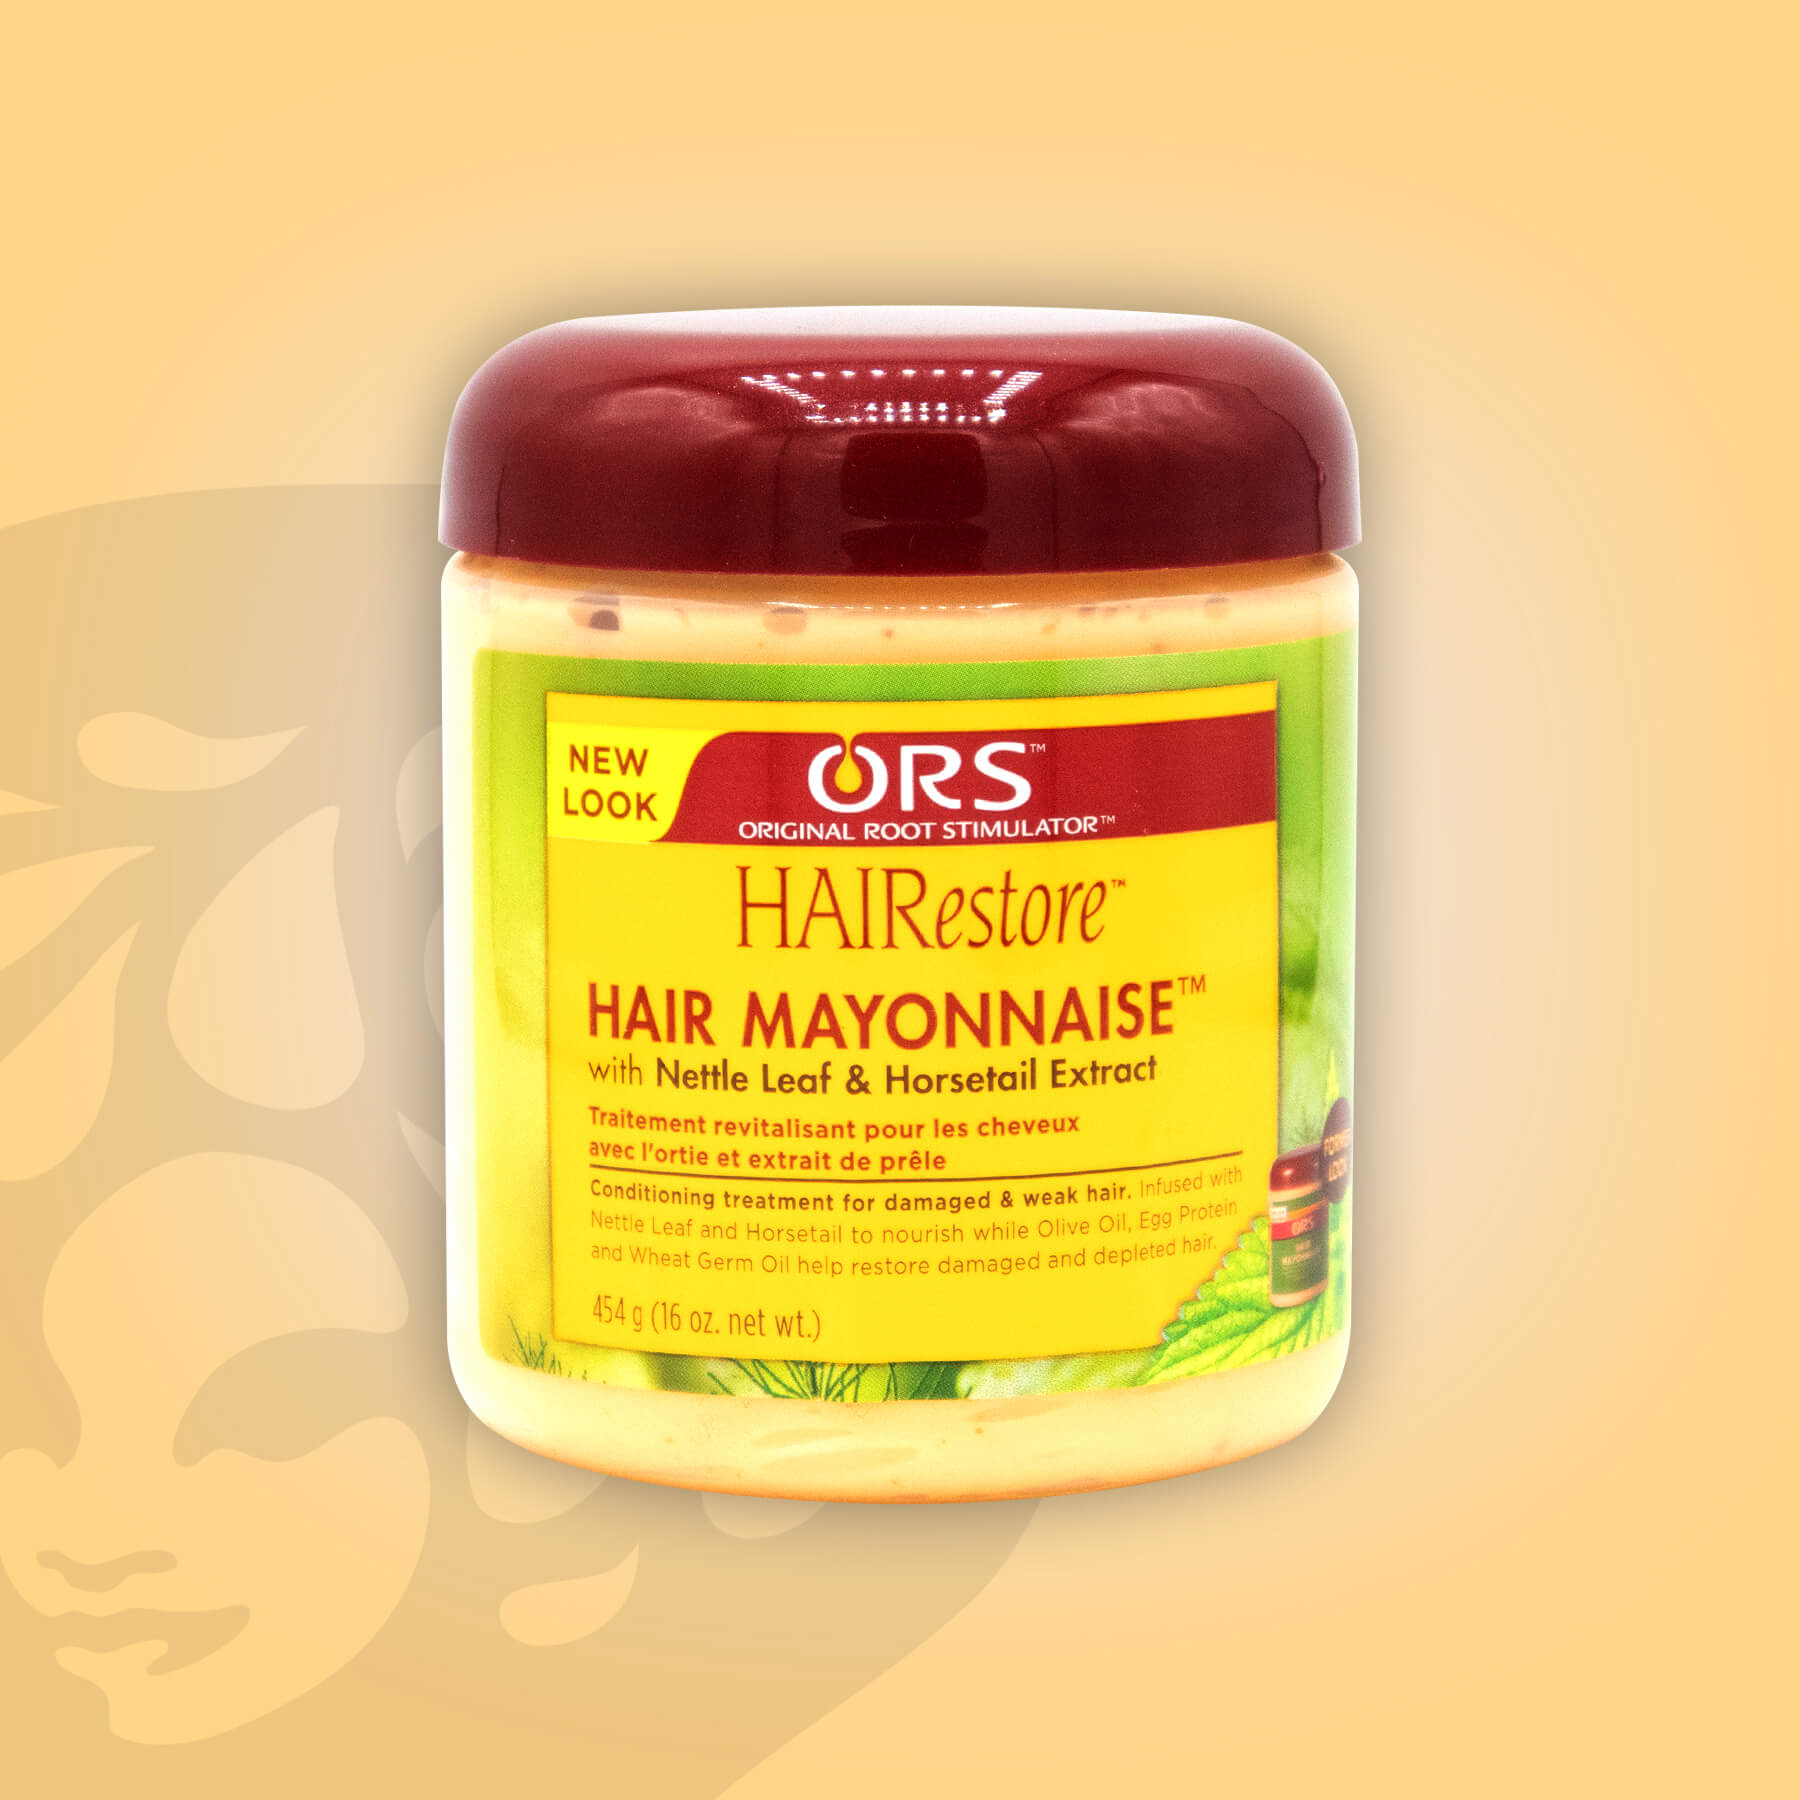 ORS HAIRestore Hair Mayonnaise with Nettle Leaf and Horsetail Extract